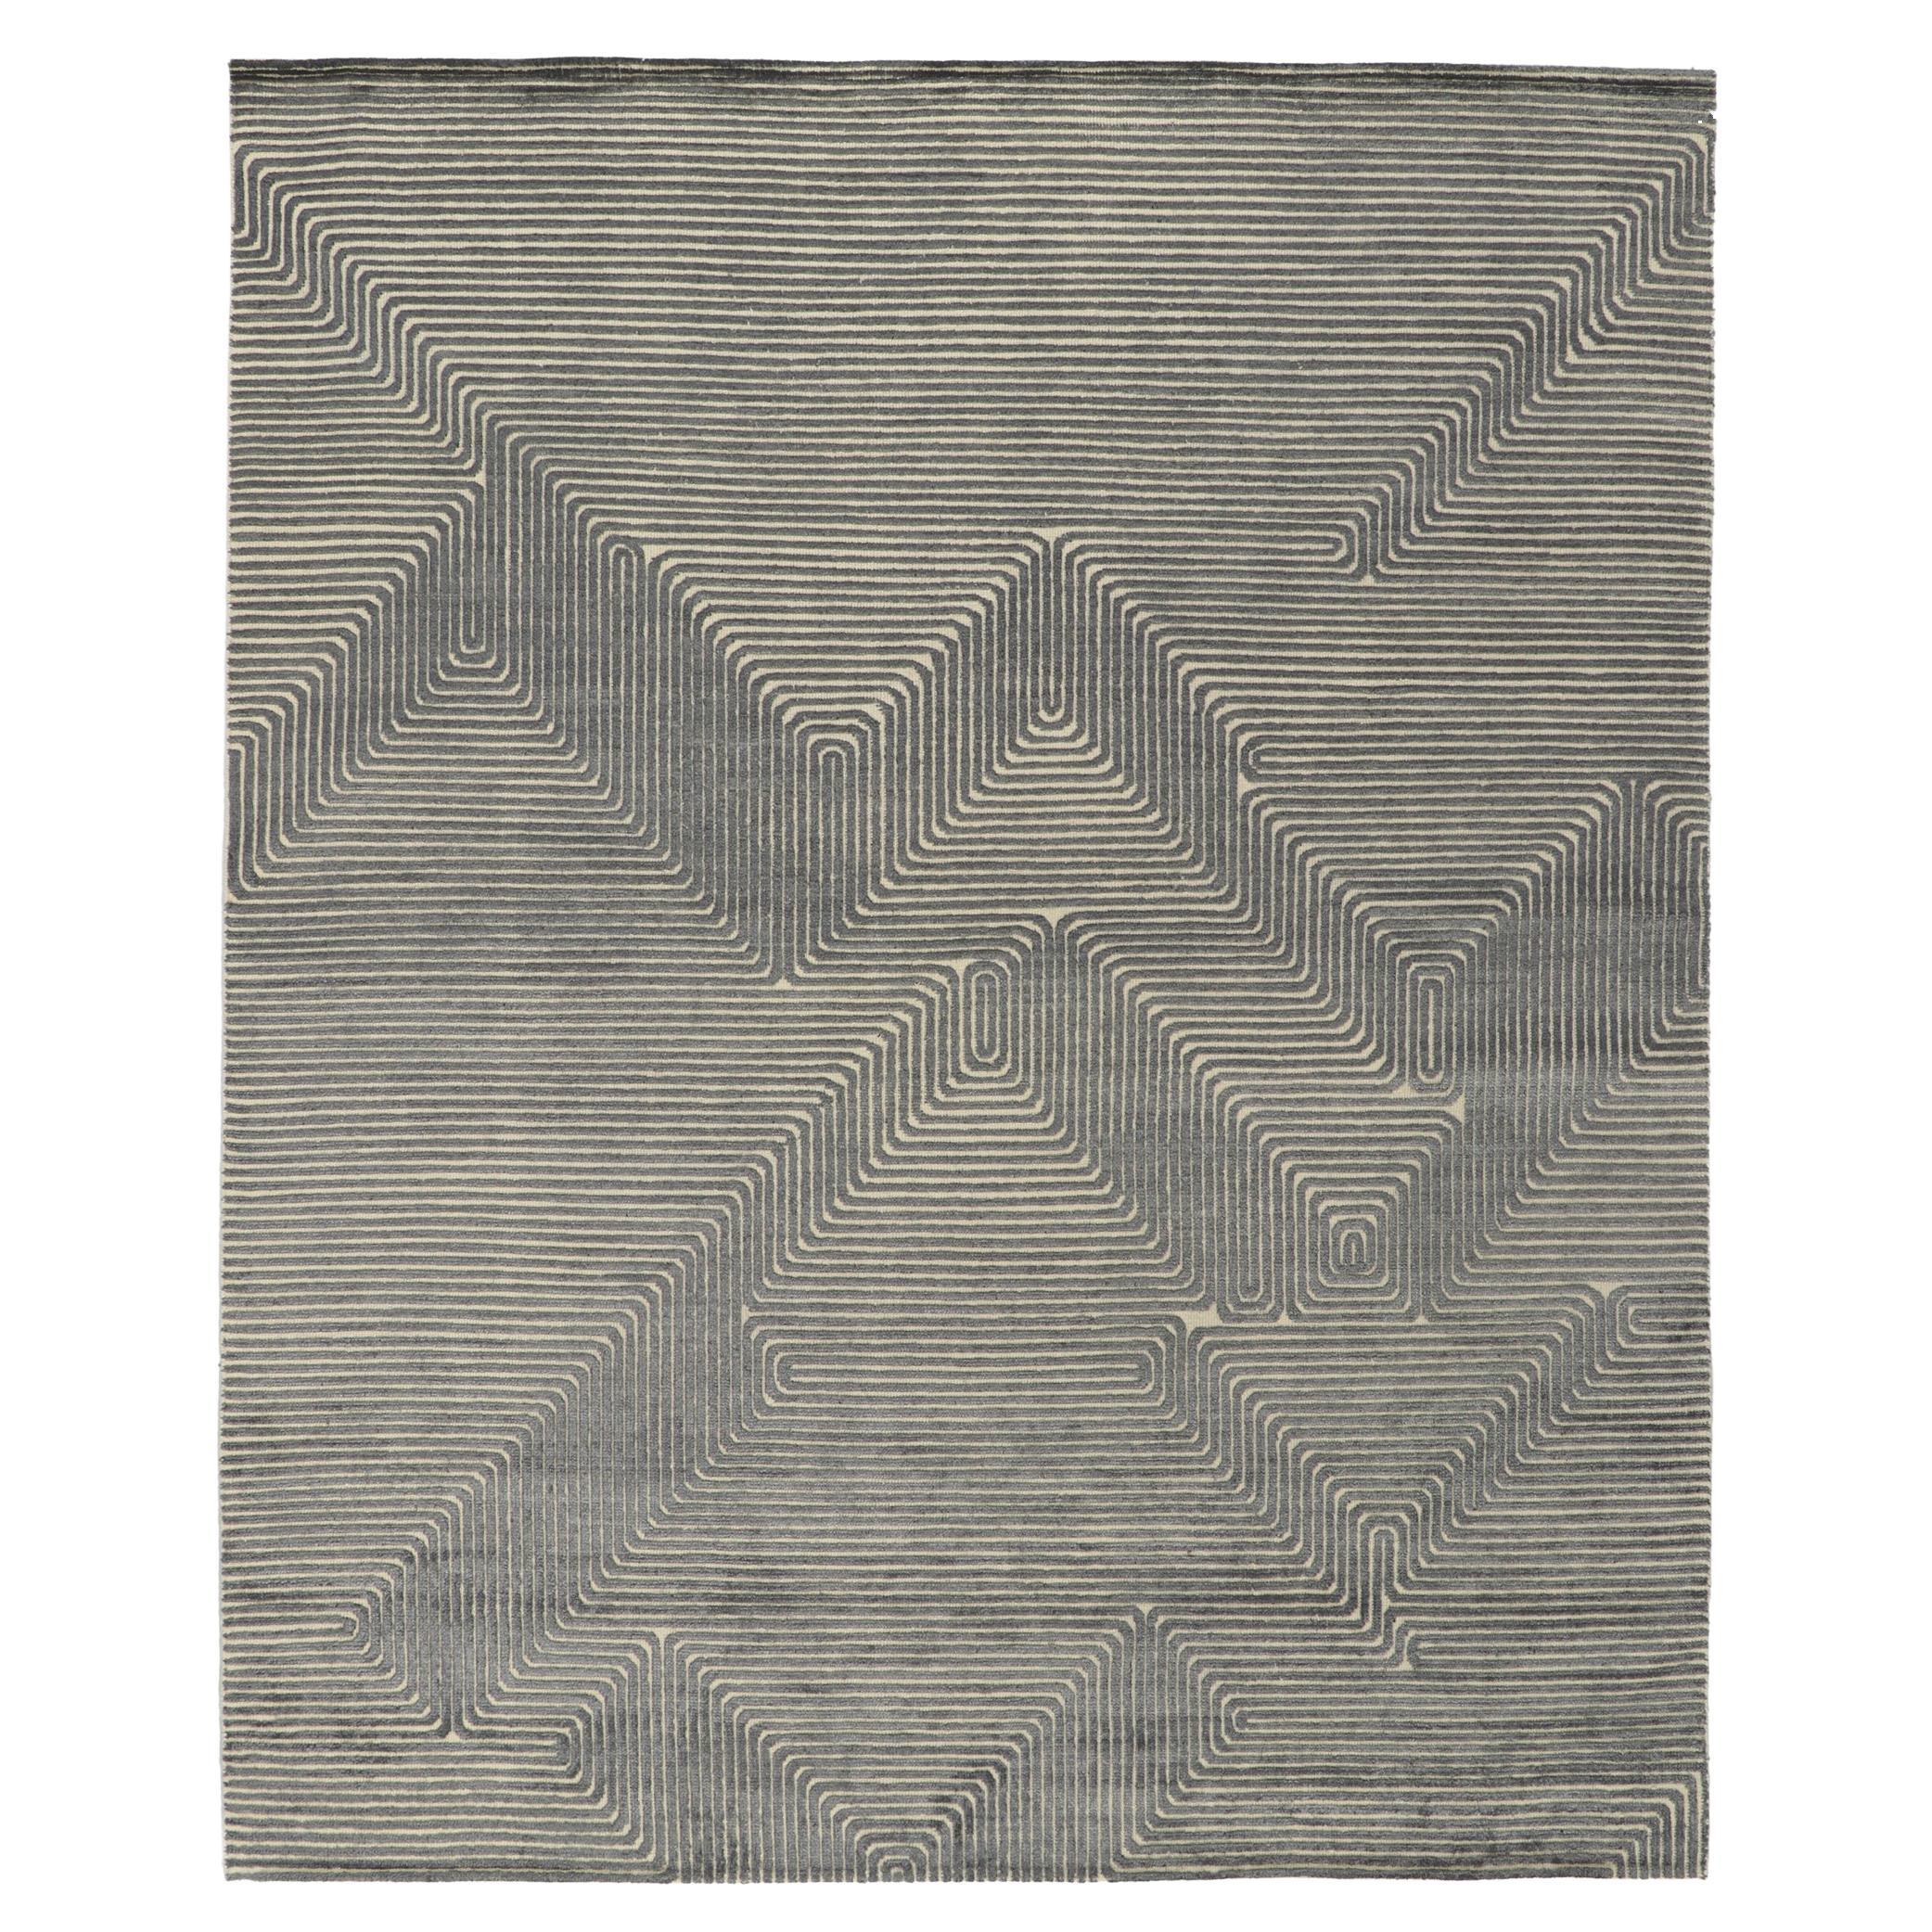 New Contemporary High-Low Textured Rug Inspired by Victor Vasarely